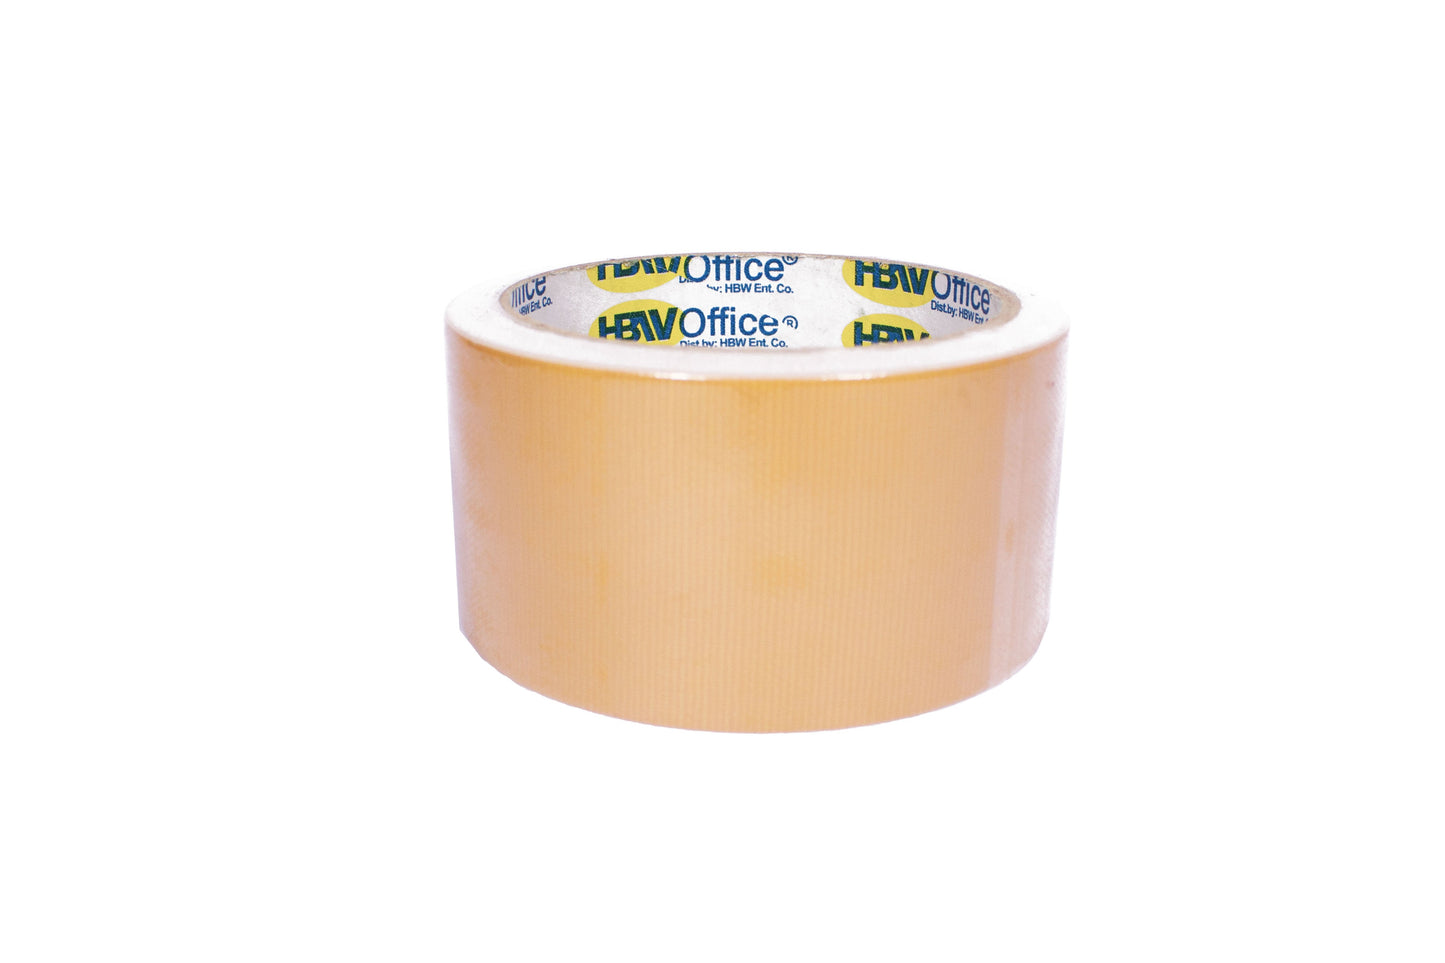 HBW Duct Tape 2inx11yd | Sold by 6s